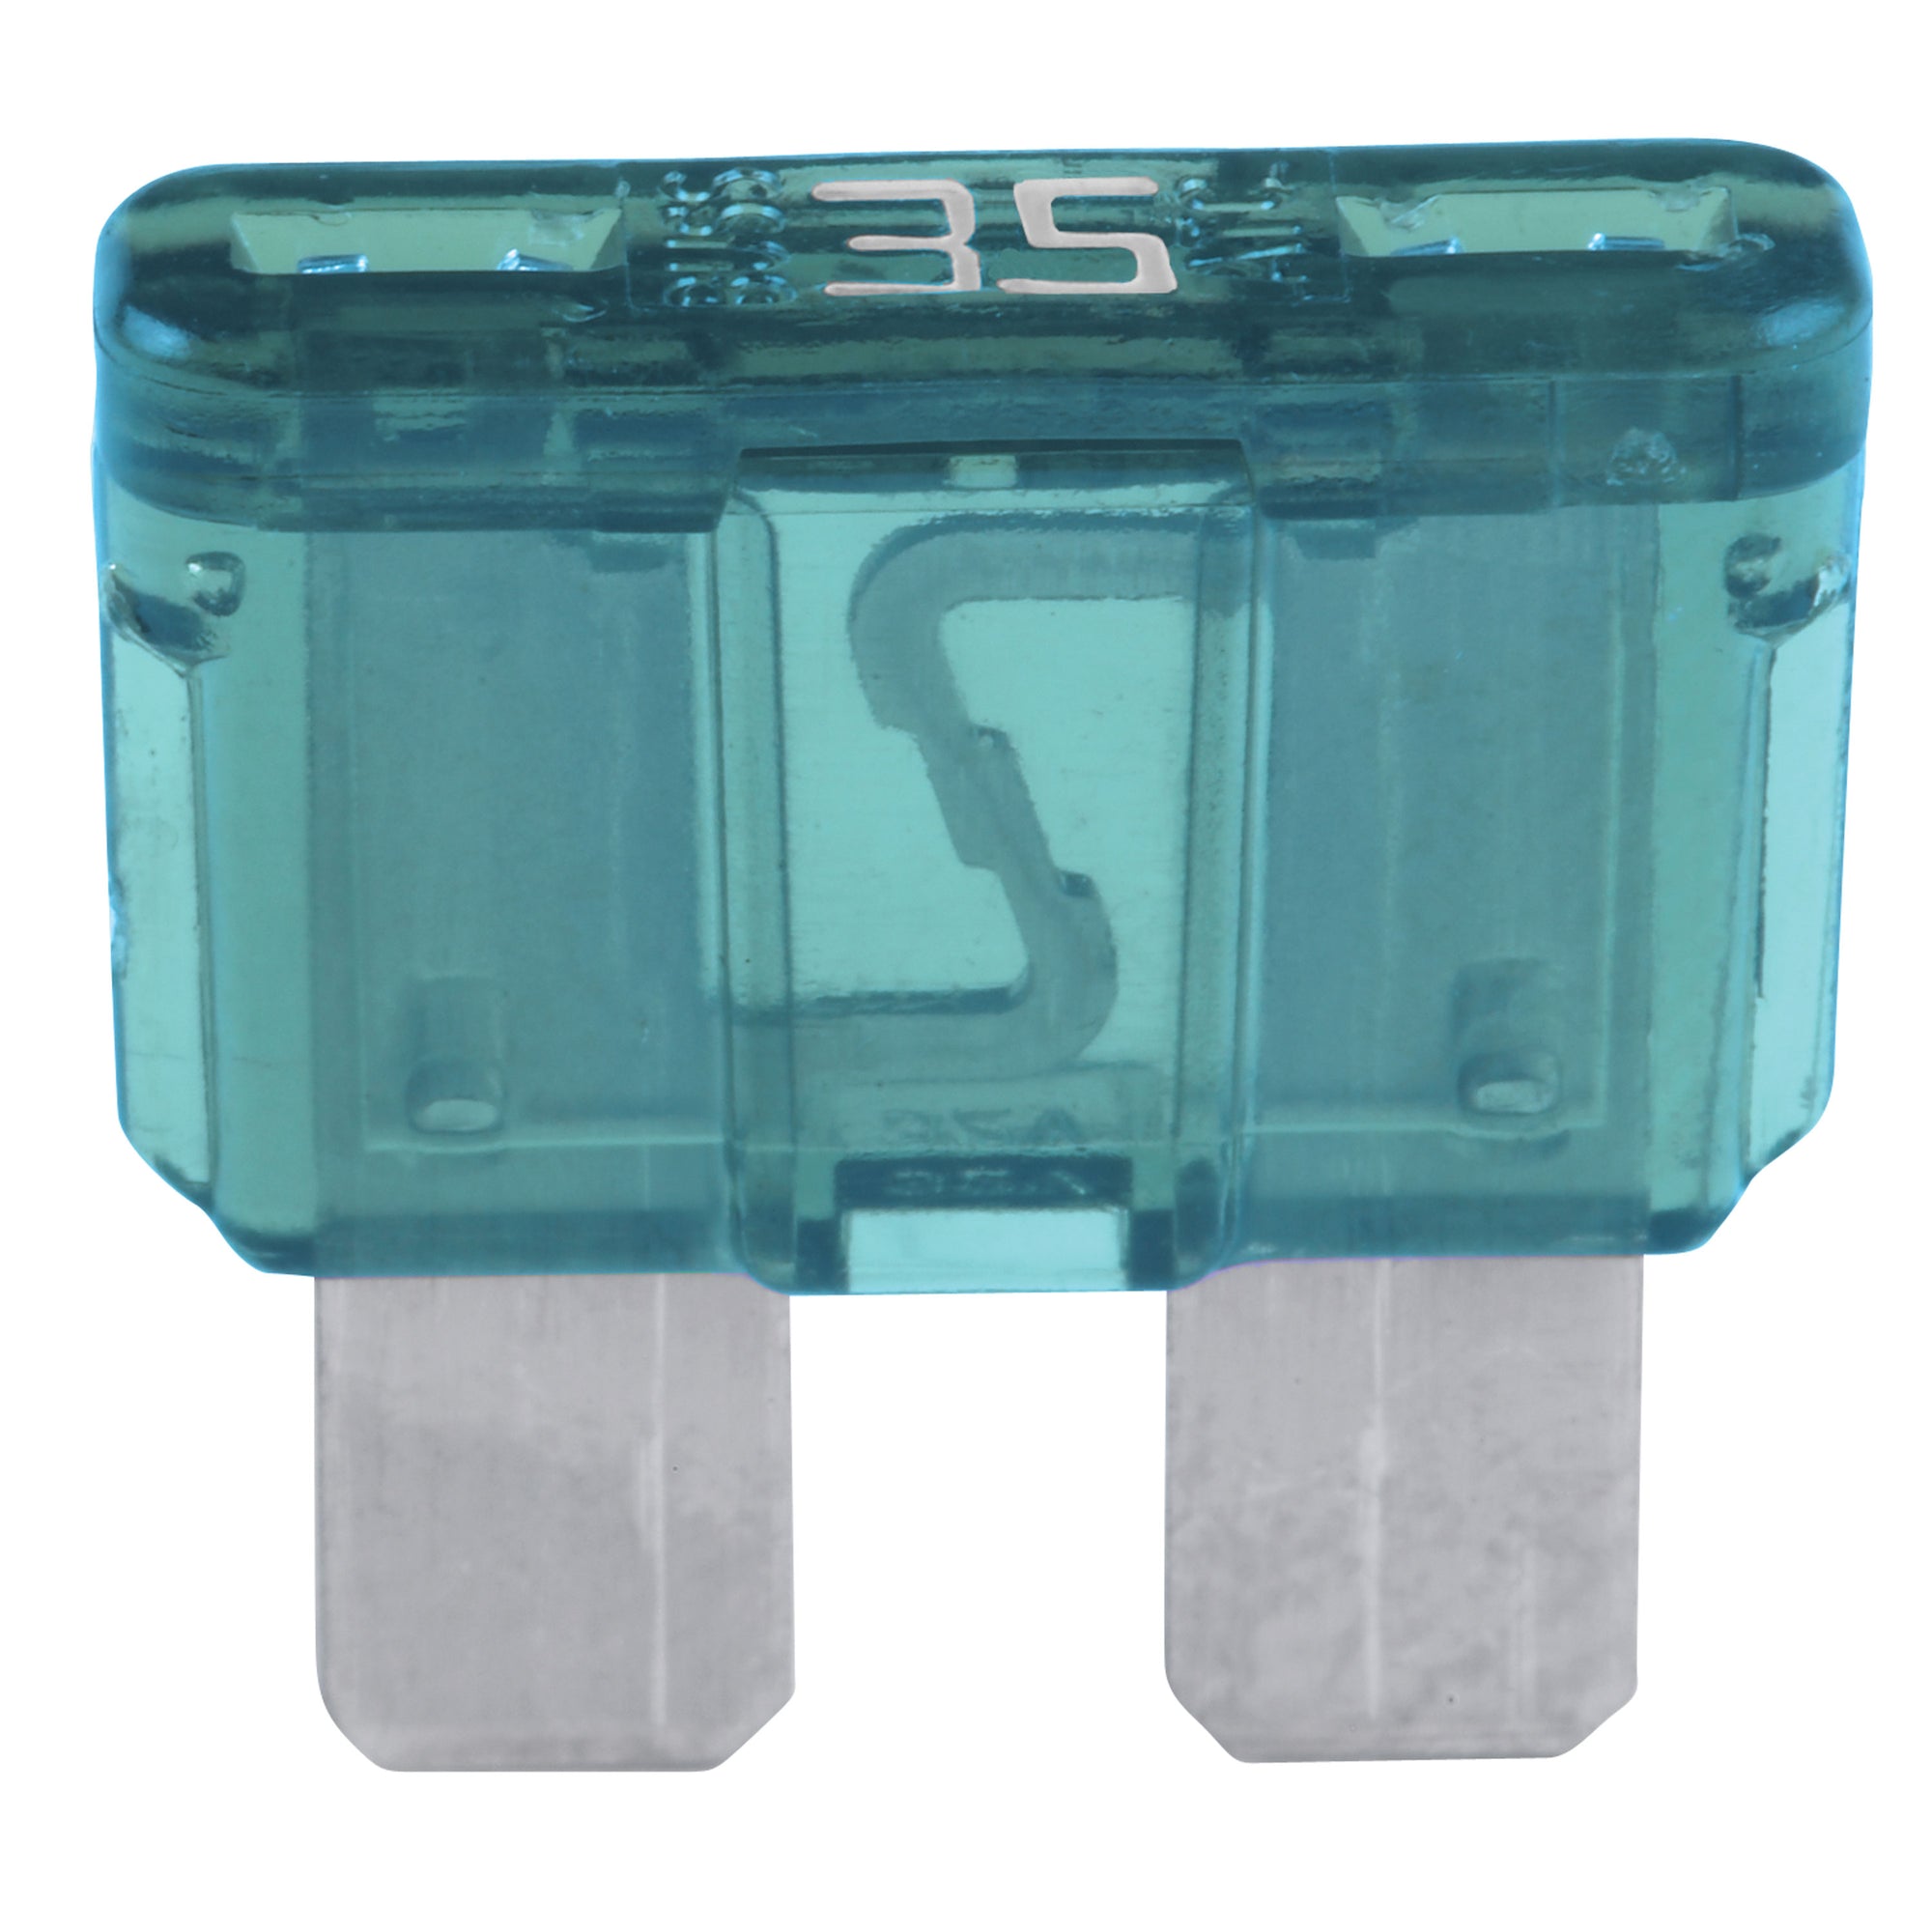 Bussmann ATC-35 ATC Fast-Acting Blade Fuse (Non-Indicating) - 35 Amp, Blue-Green, 5 Pack